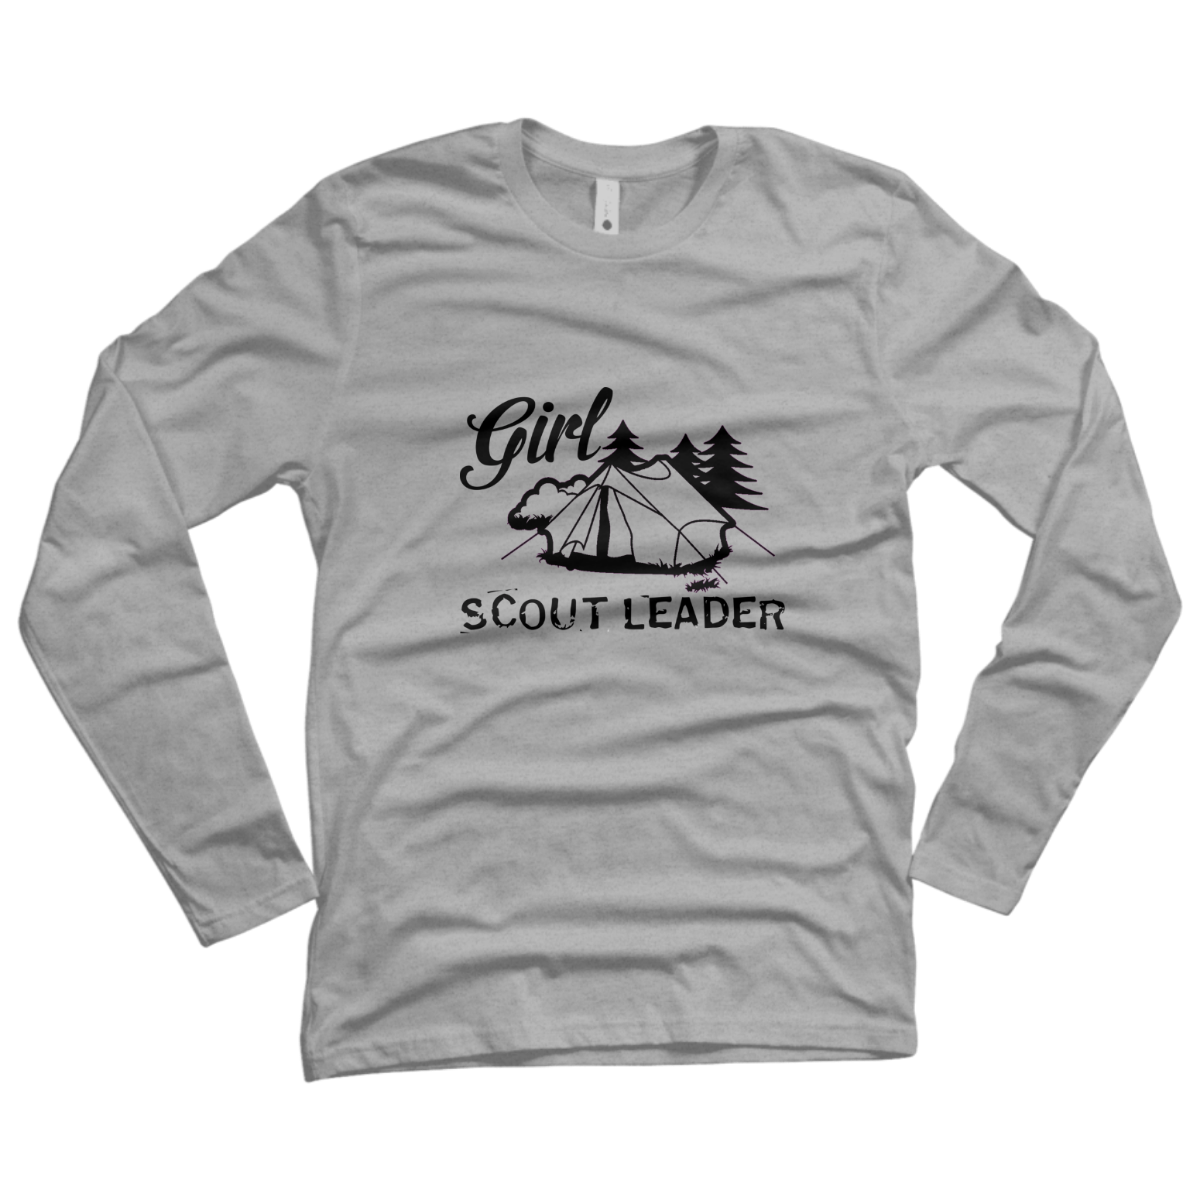 girl scout tee shirts